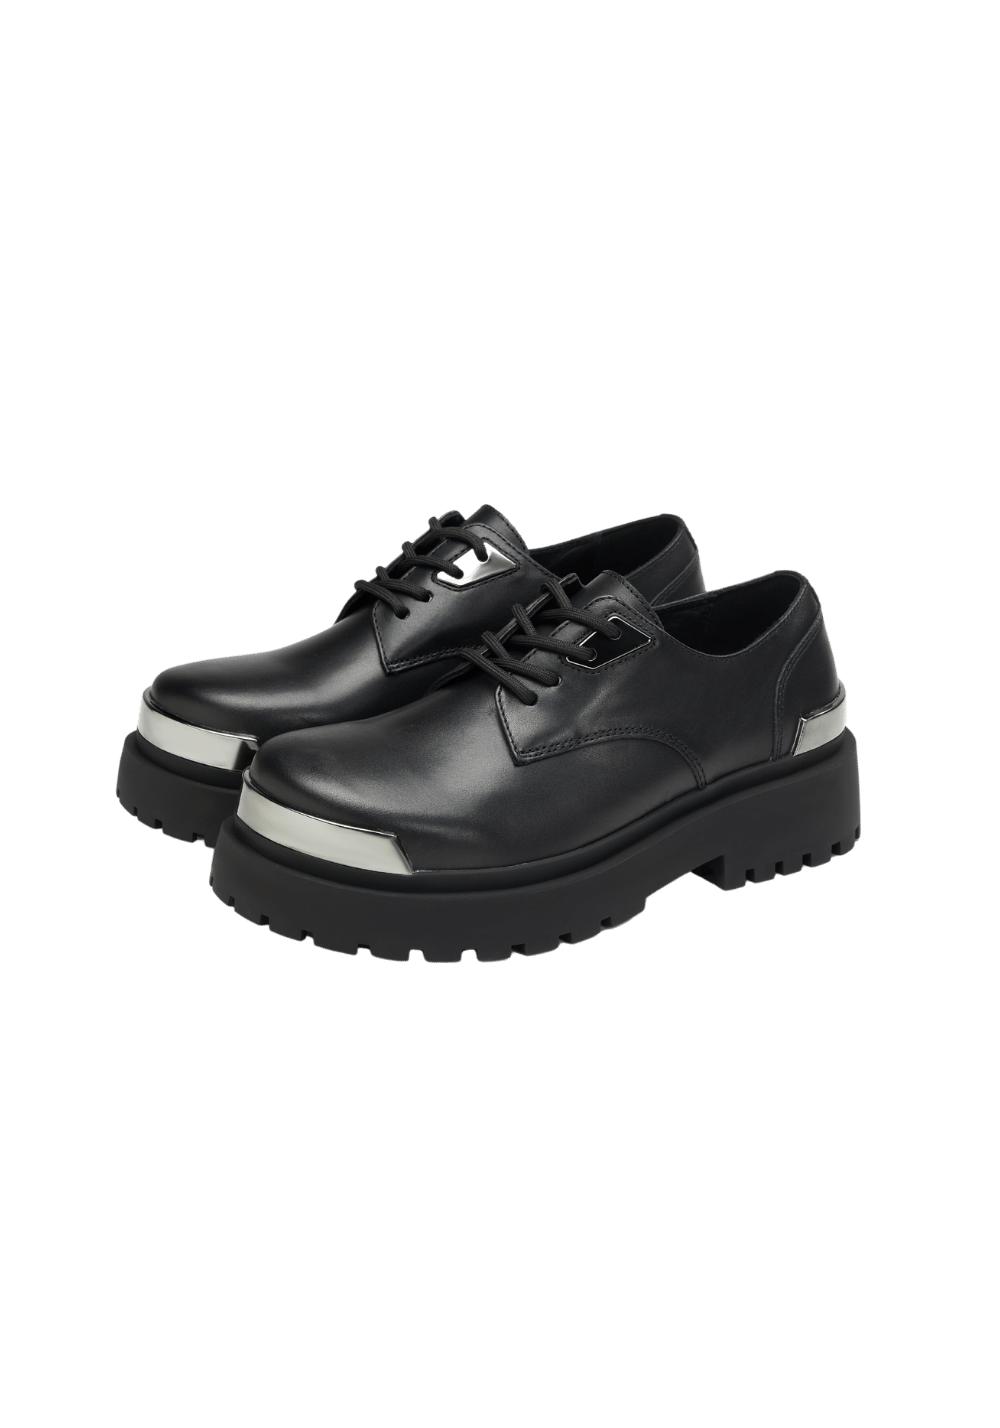 Derby Leather Shoes - PSYLOS 1, Derby Leather Shoes, Shoes, PCLP, PSYLOS 1